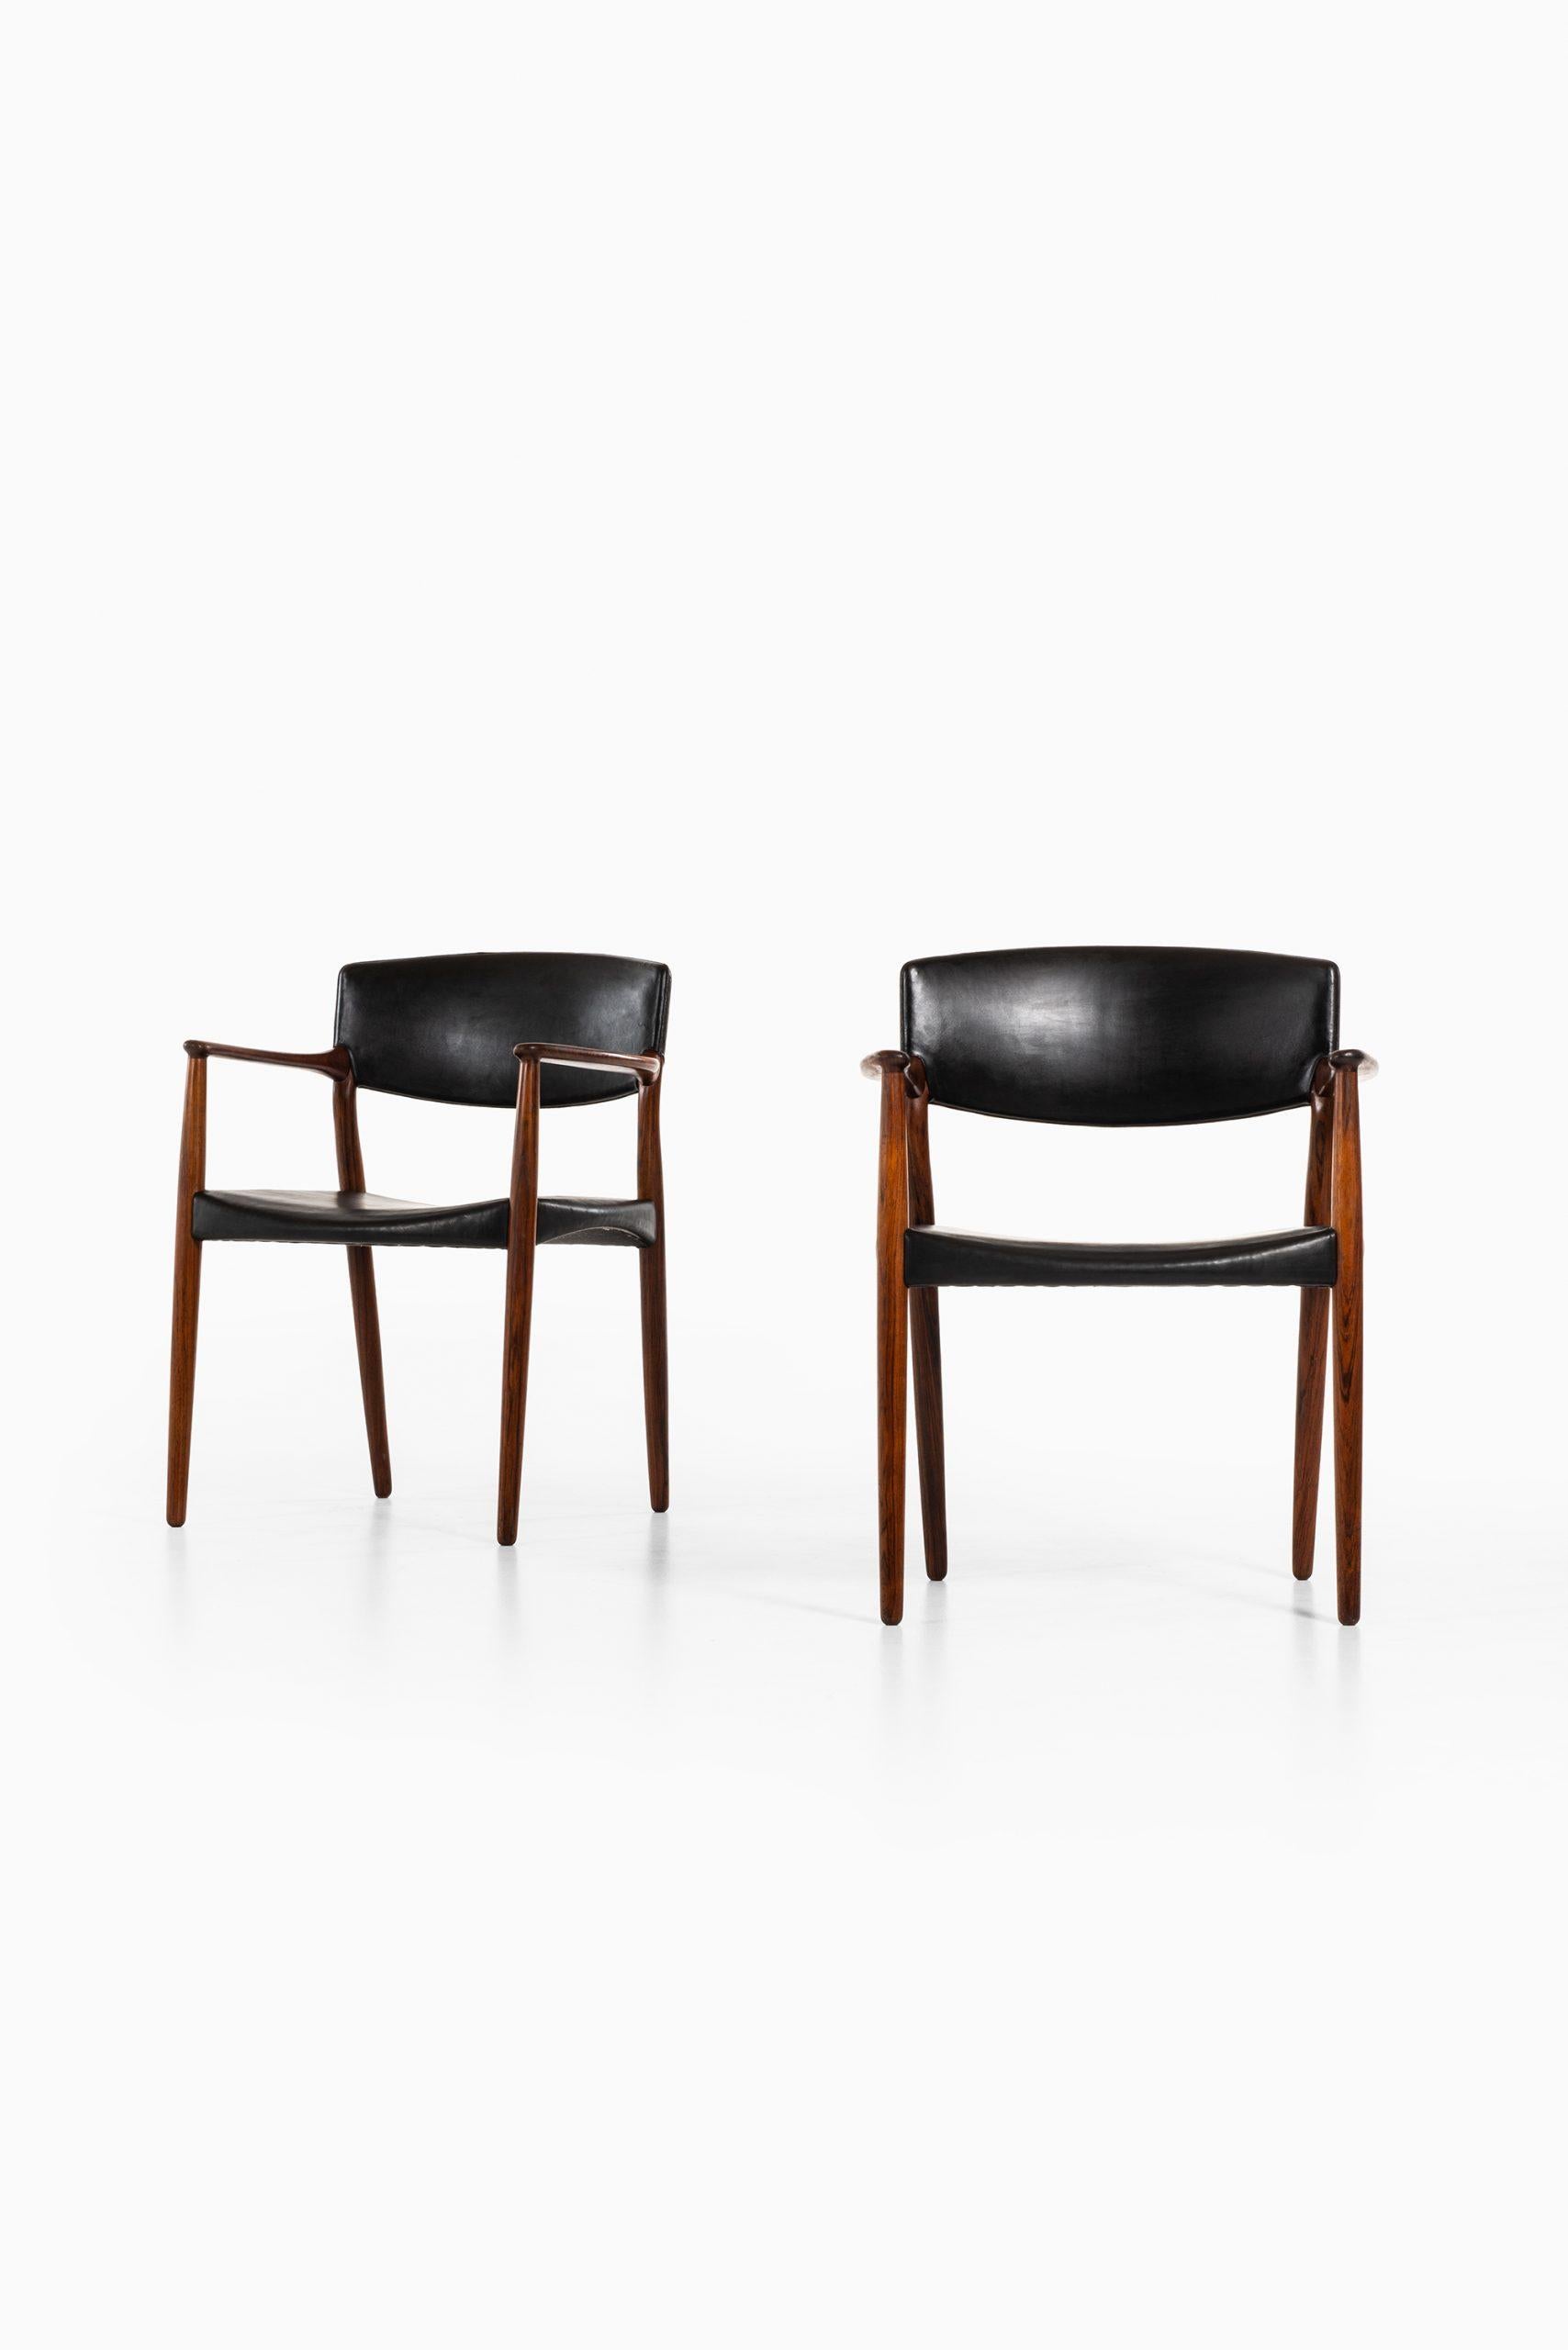 Rare pair of armchairs designed by Aksel Bender Madsen & Ejner Larsen. Produced by cabinetmaker Willy Beck in Denmark.